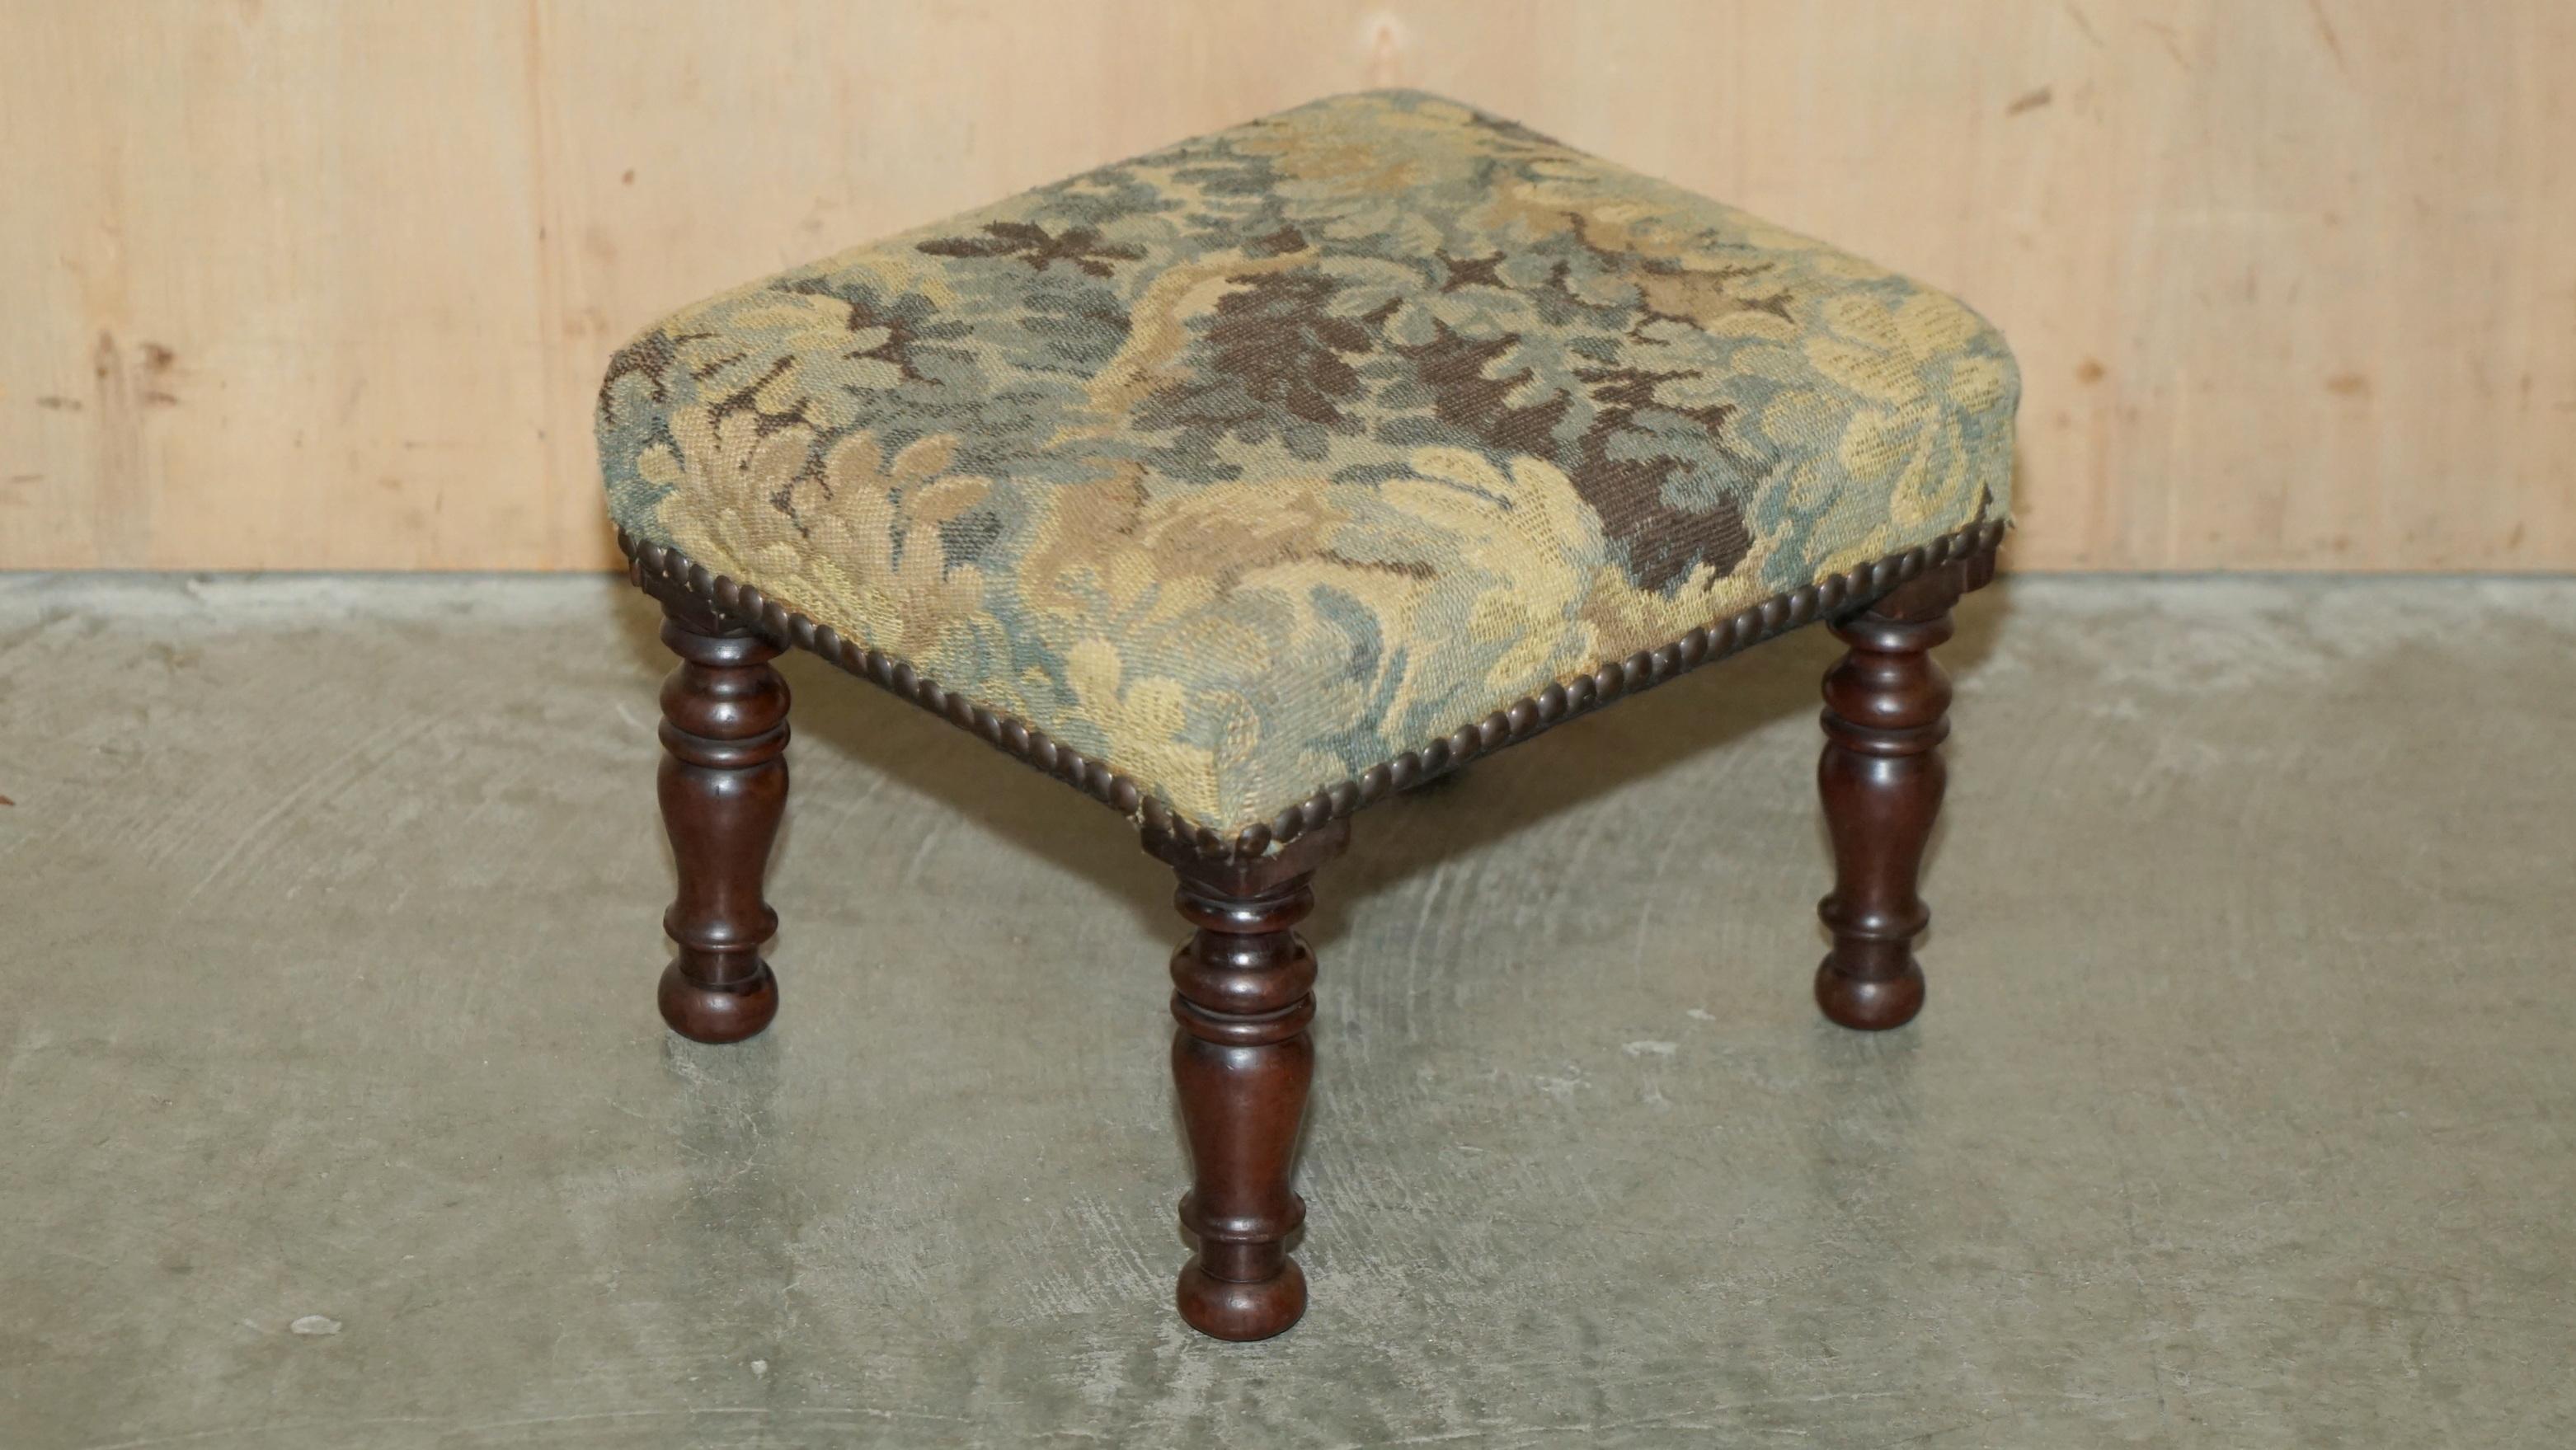 Royal House Antiques

Royal House Antiques is delighted to offer for sale this lovely small English Country House circa 1920's Embroidered footstool designed to go with a wingback armchair

Please note the delivery fee listed is just a guide, it